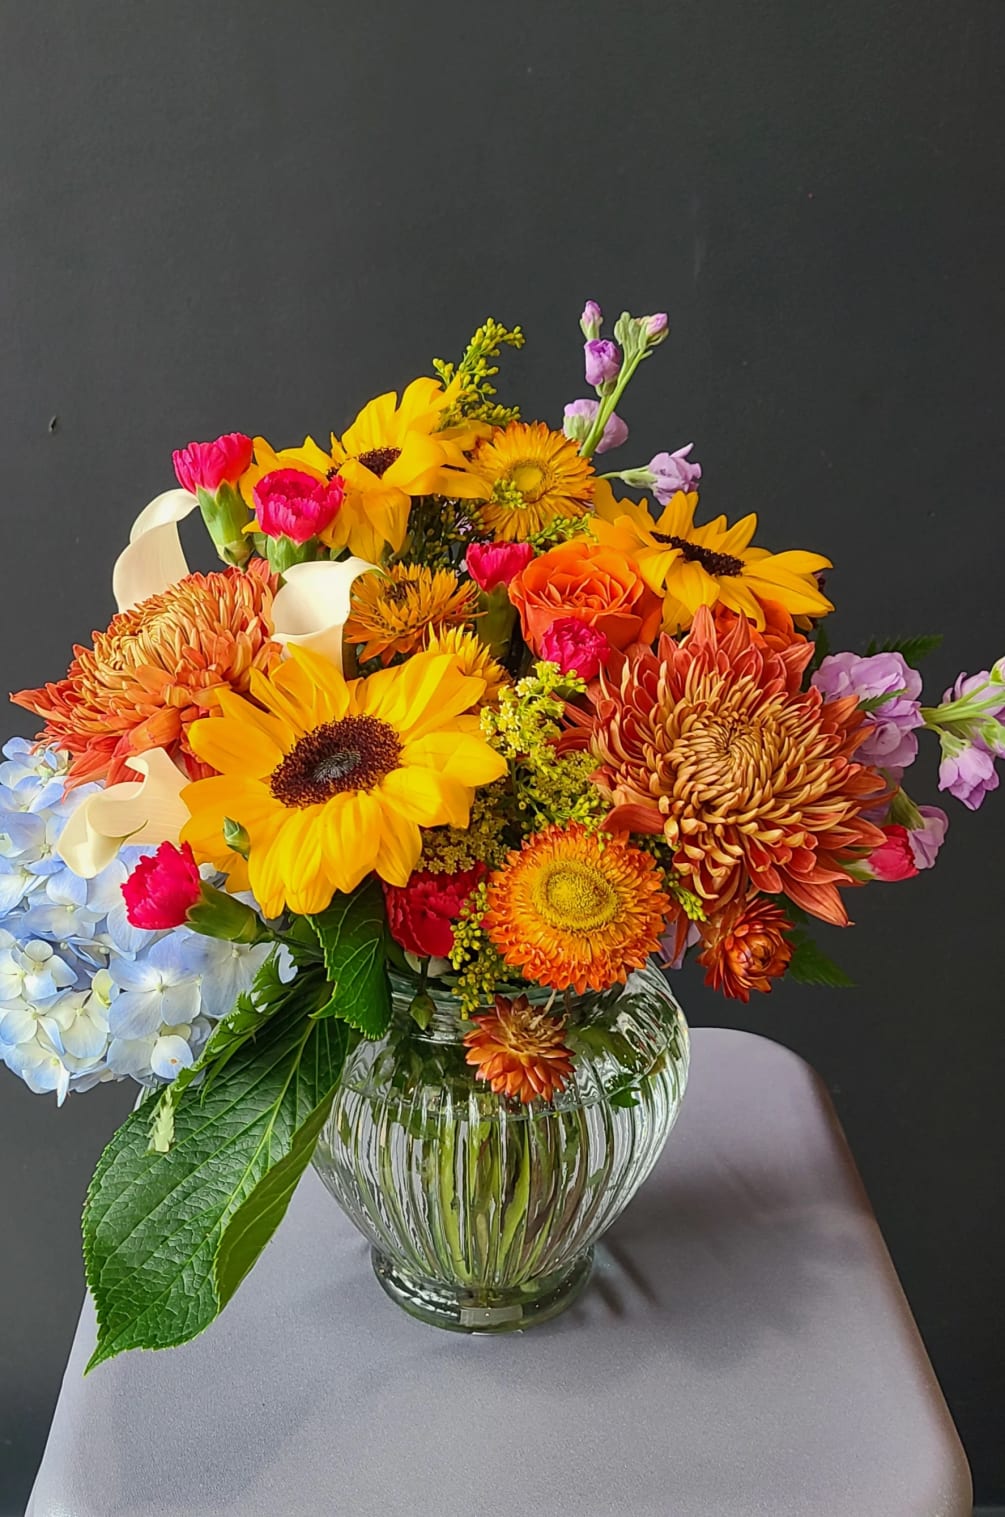 Like a crisp fall day, this arrangements of mums, sunflowers, calla lilies